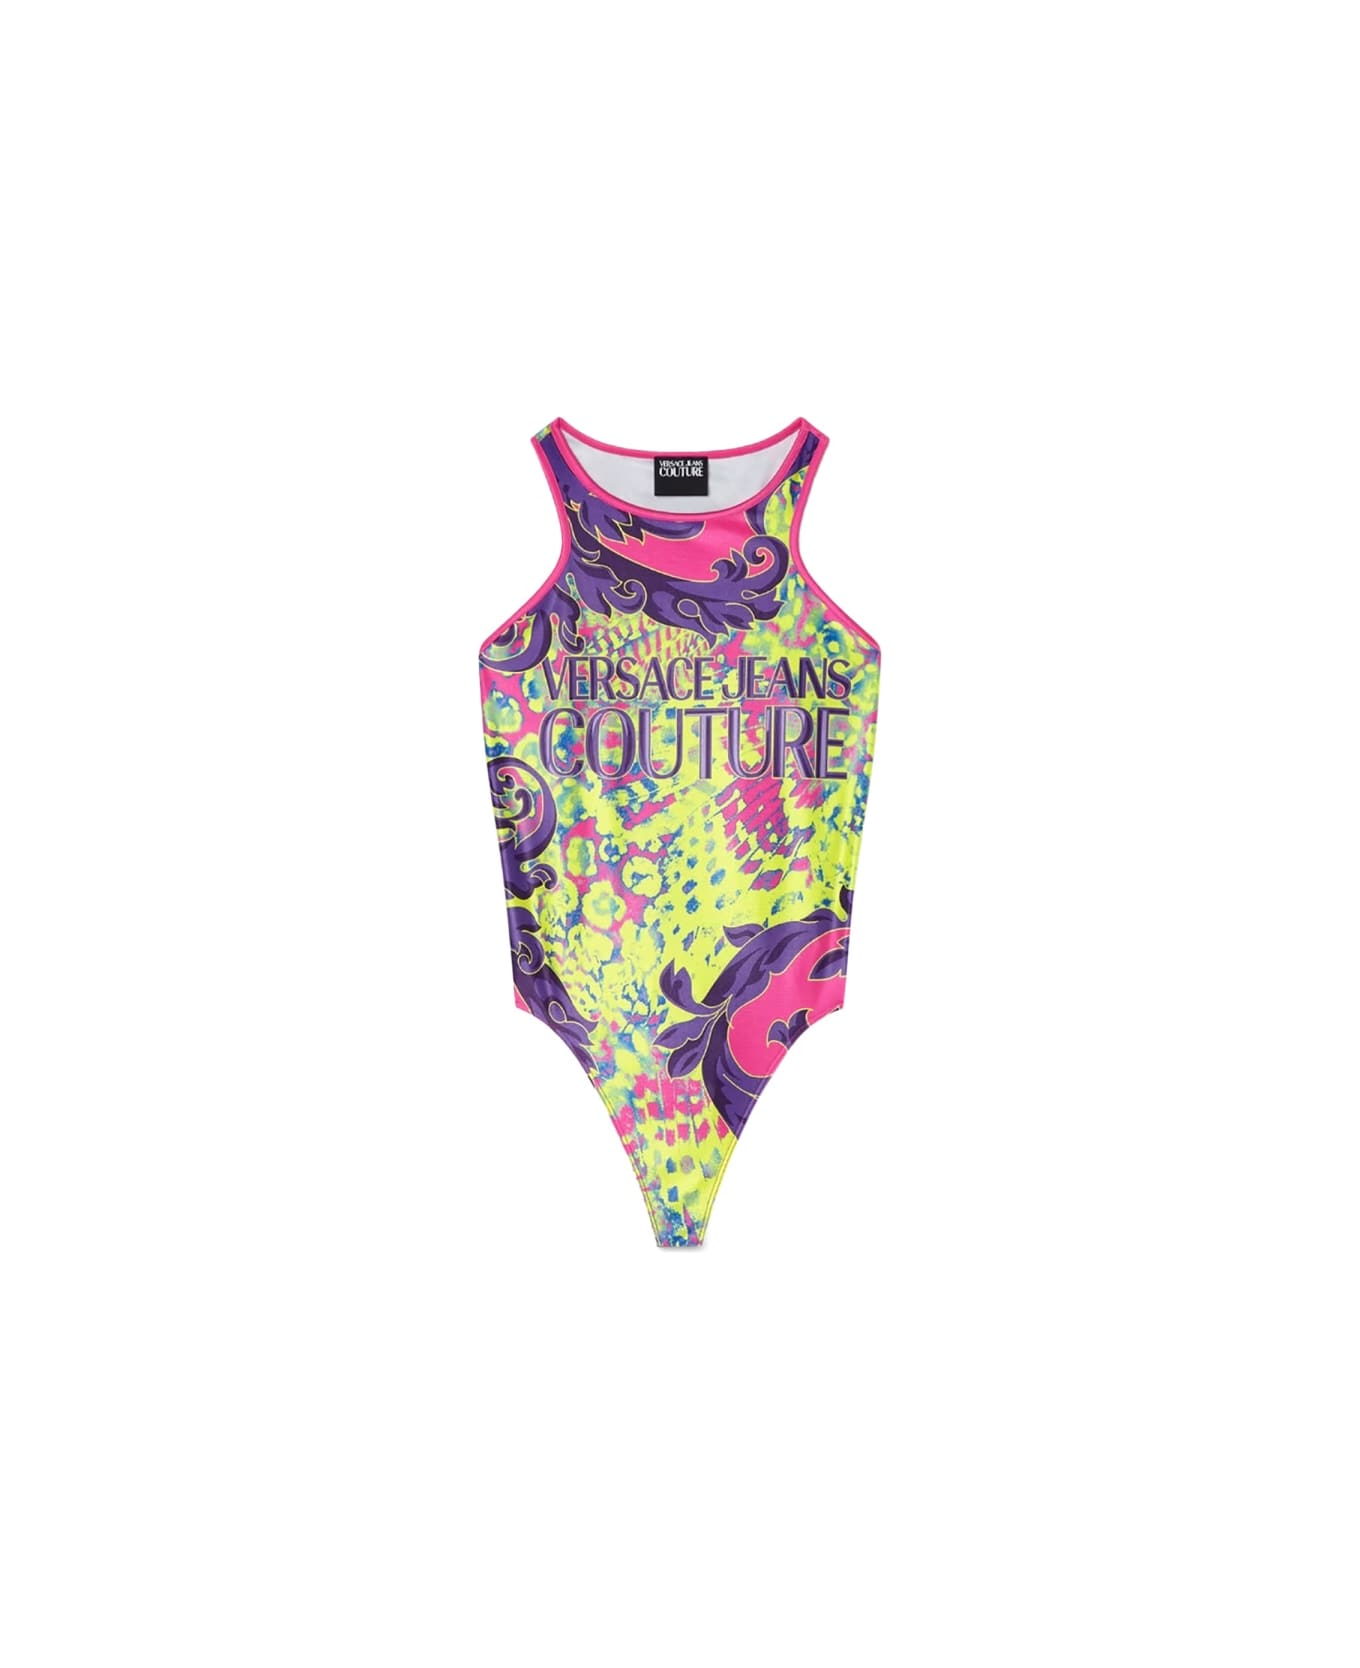 Versace Jeans Couture Full Costume - MULTICOLOR